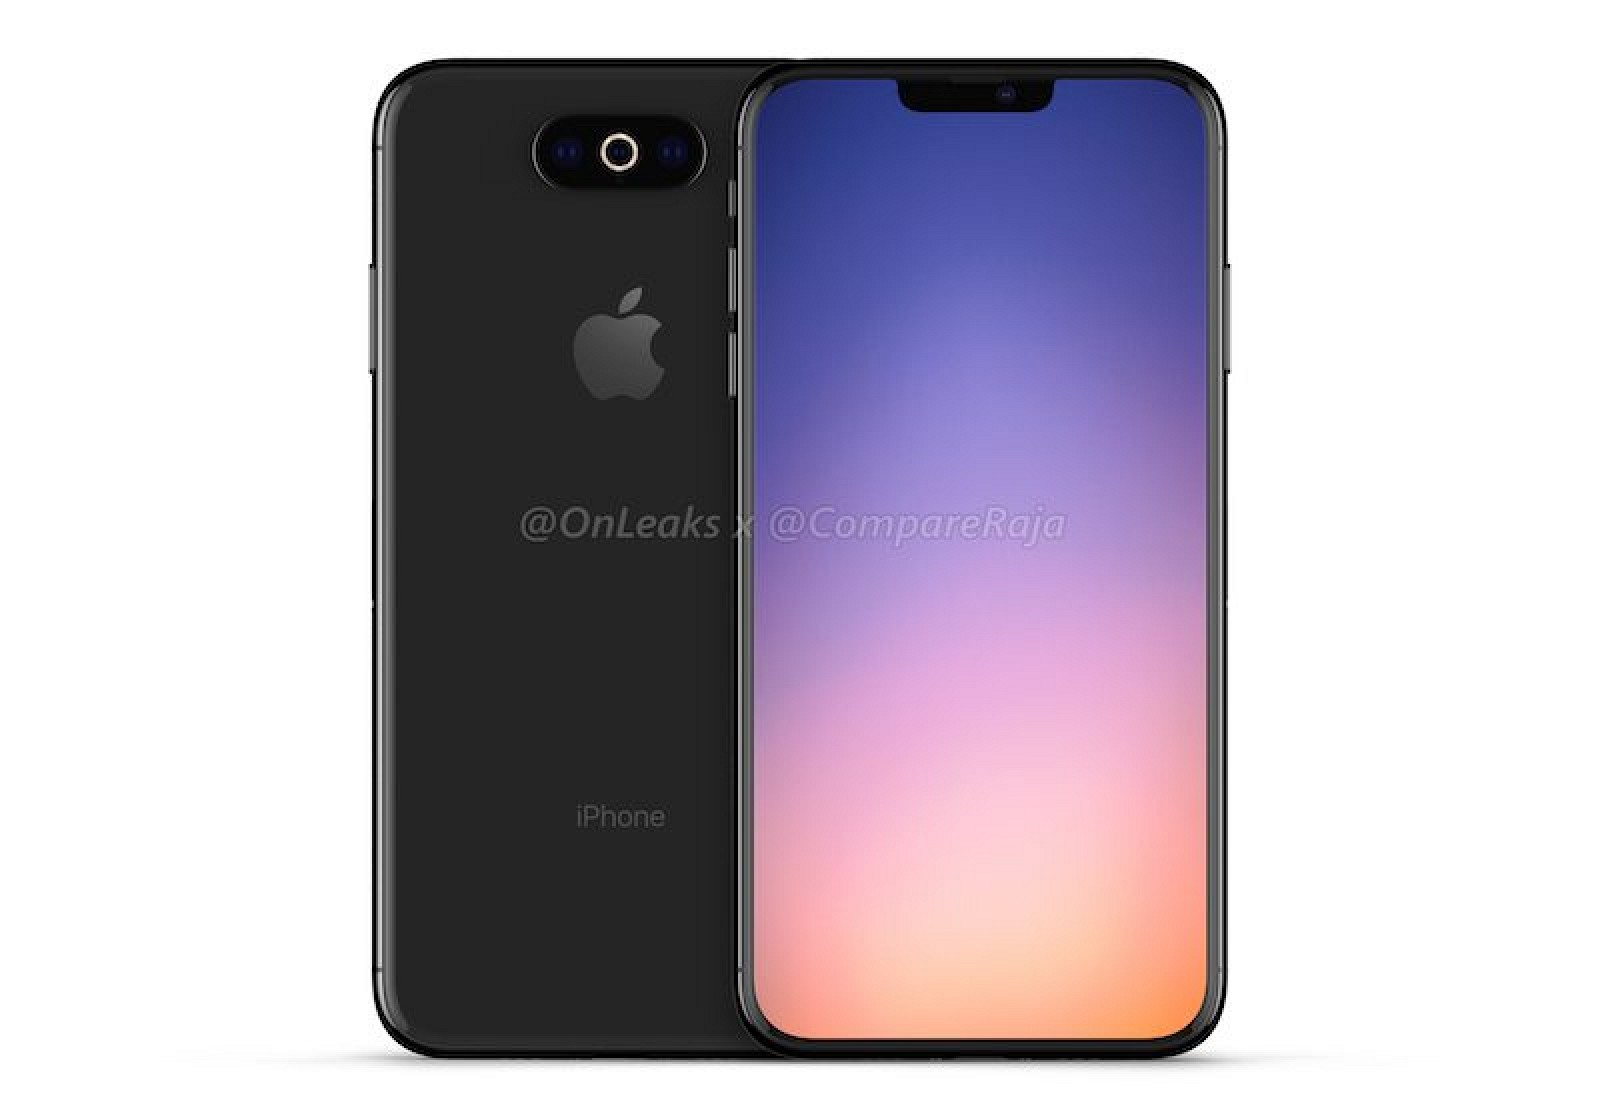 photo of Sketchy Rumor Suggests 2019 iPhone Could Feature 4,000mAh Battery, 15W Wireless Charging, 3X Telephoto Camera and 120Hz… image